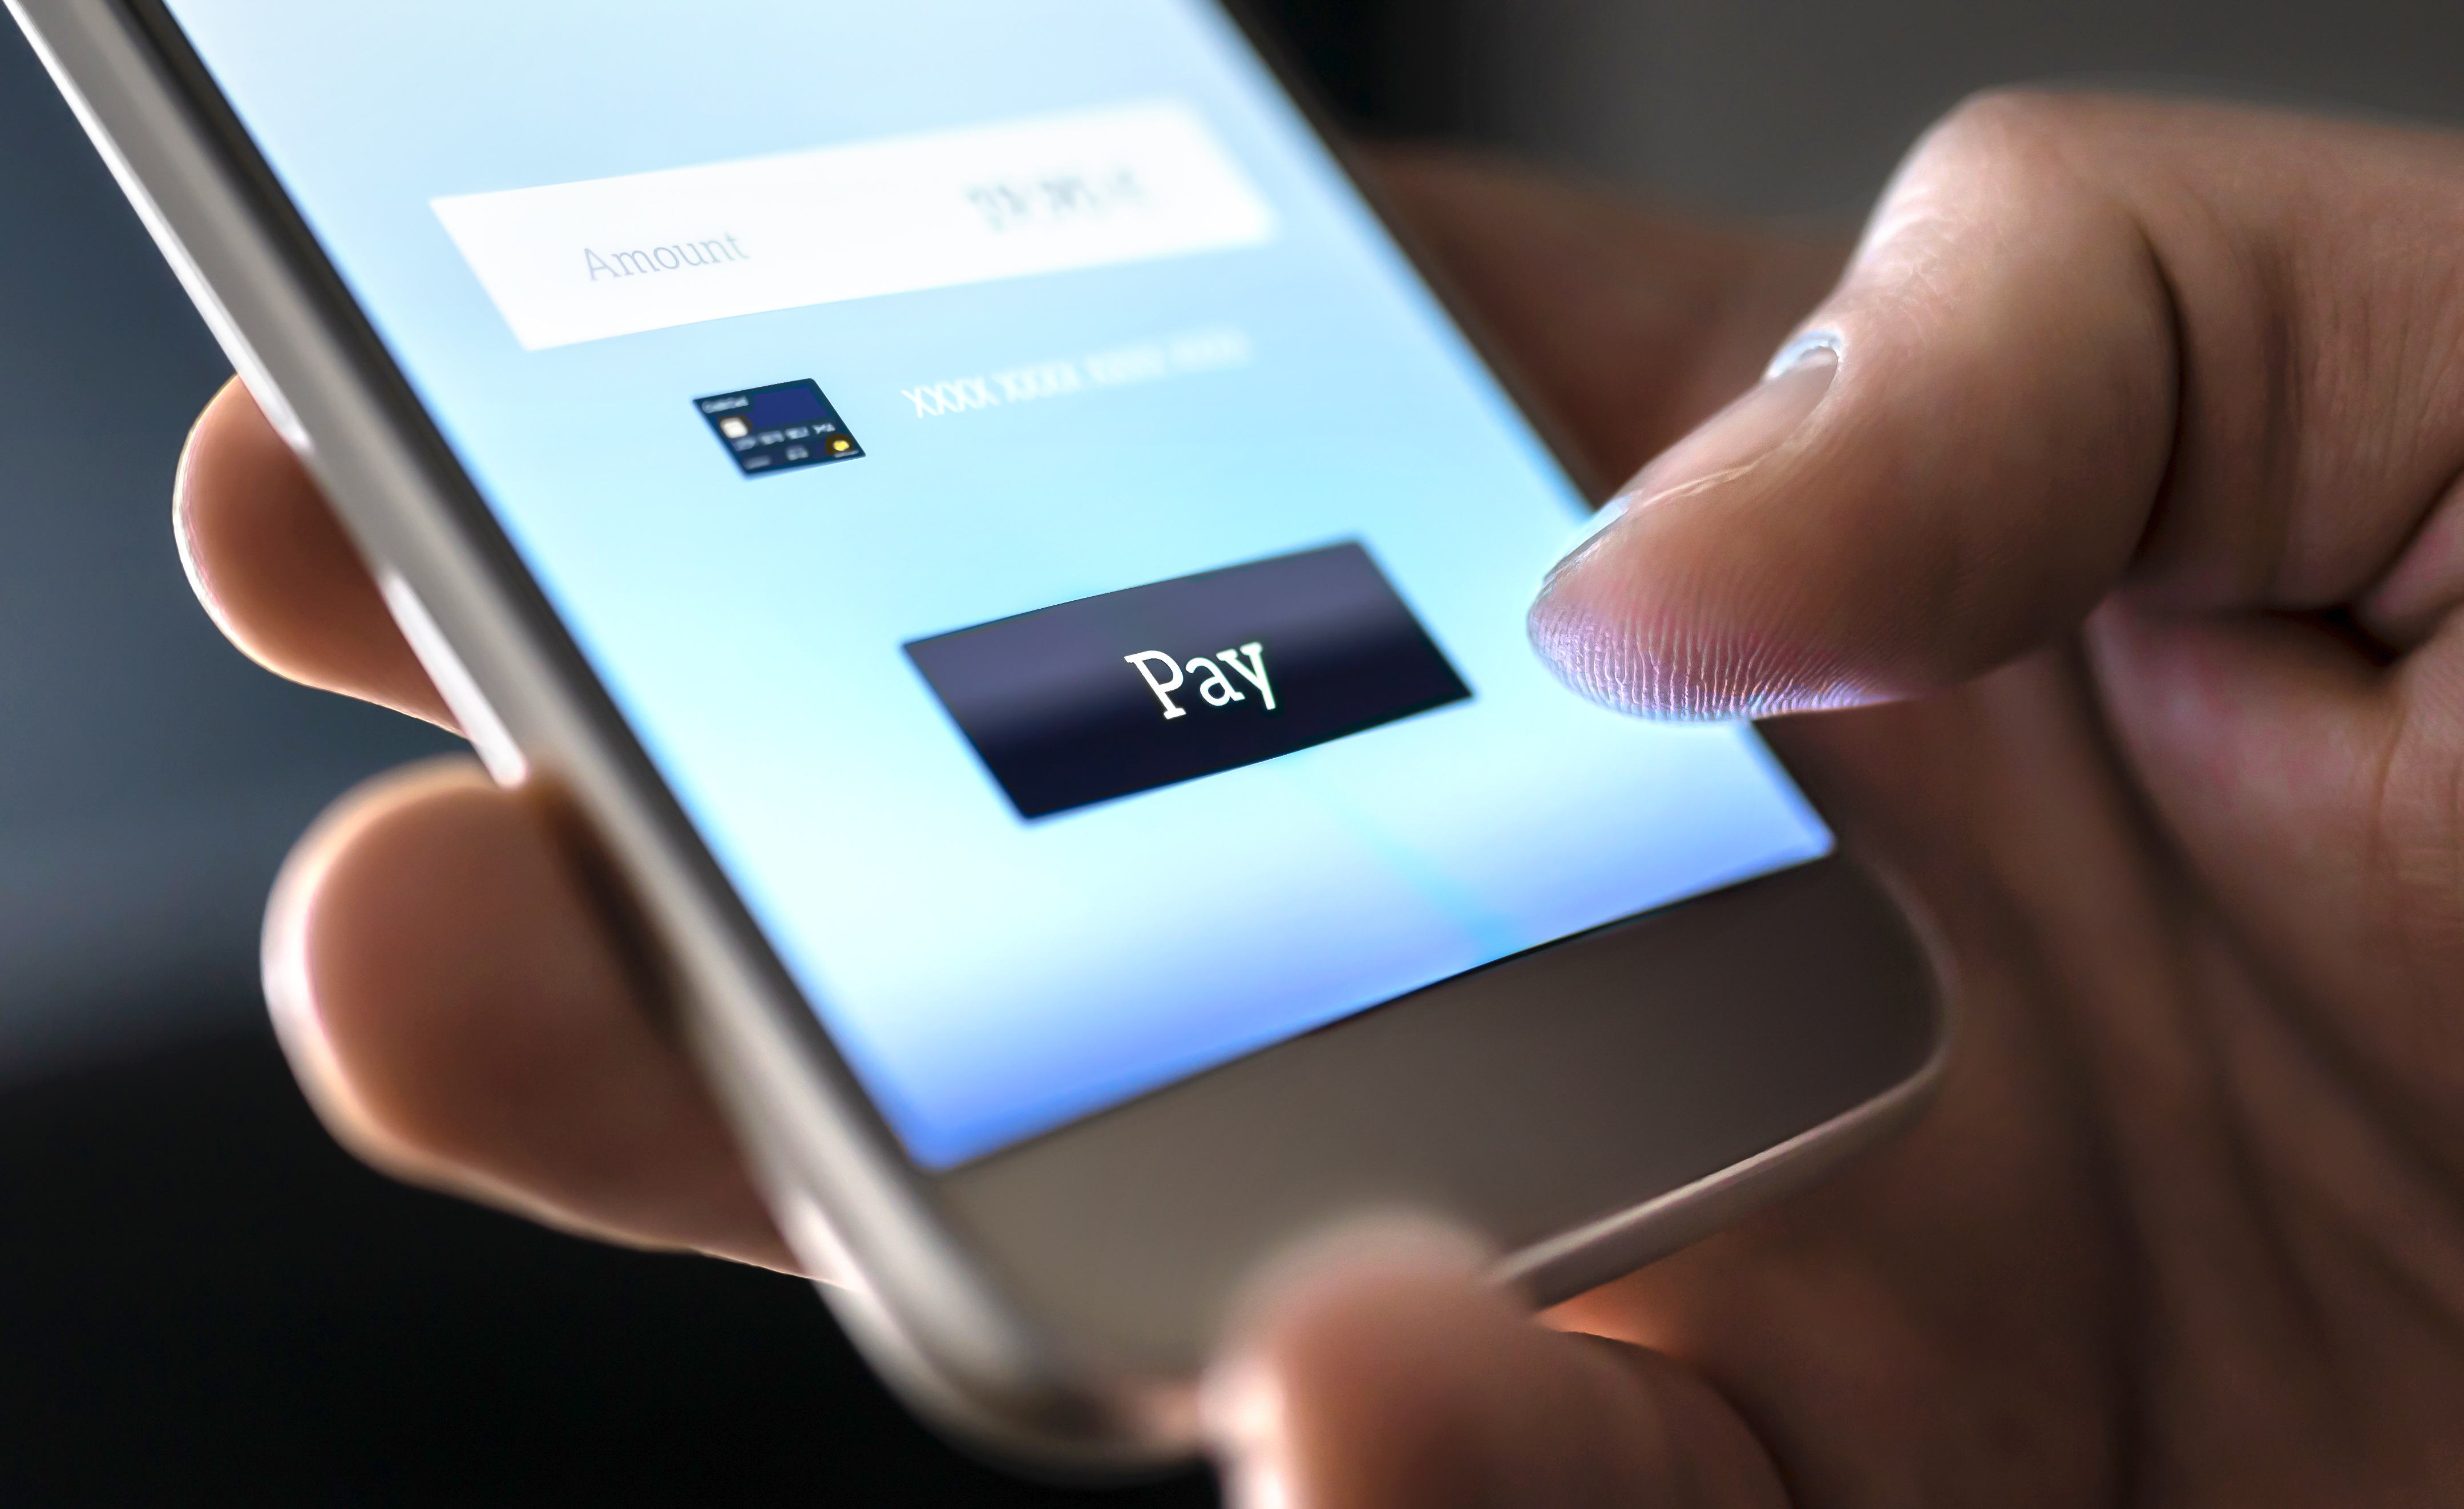 Mobile payment with wallet app and wireless nfc technology.